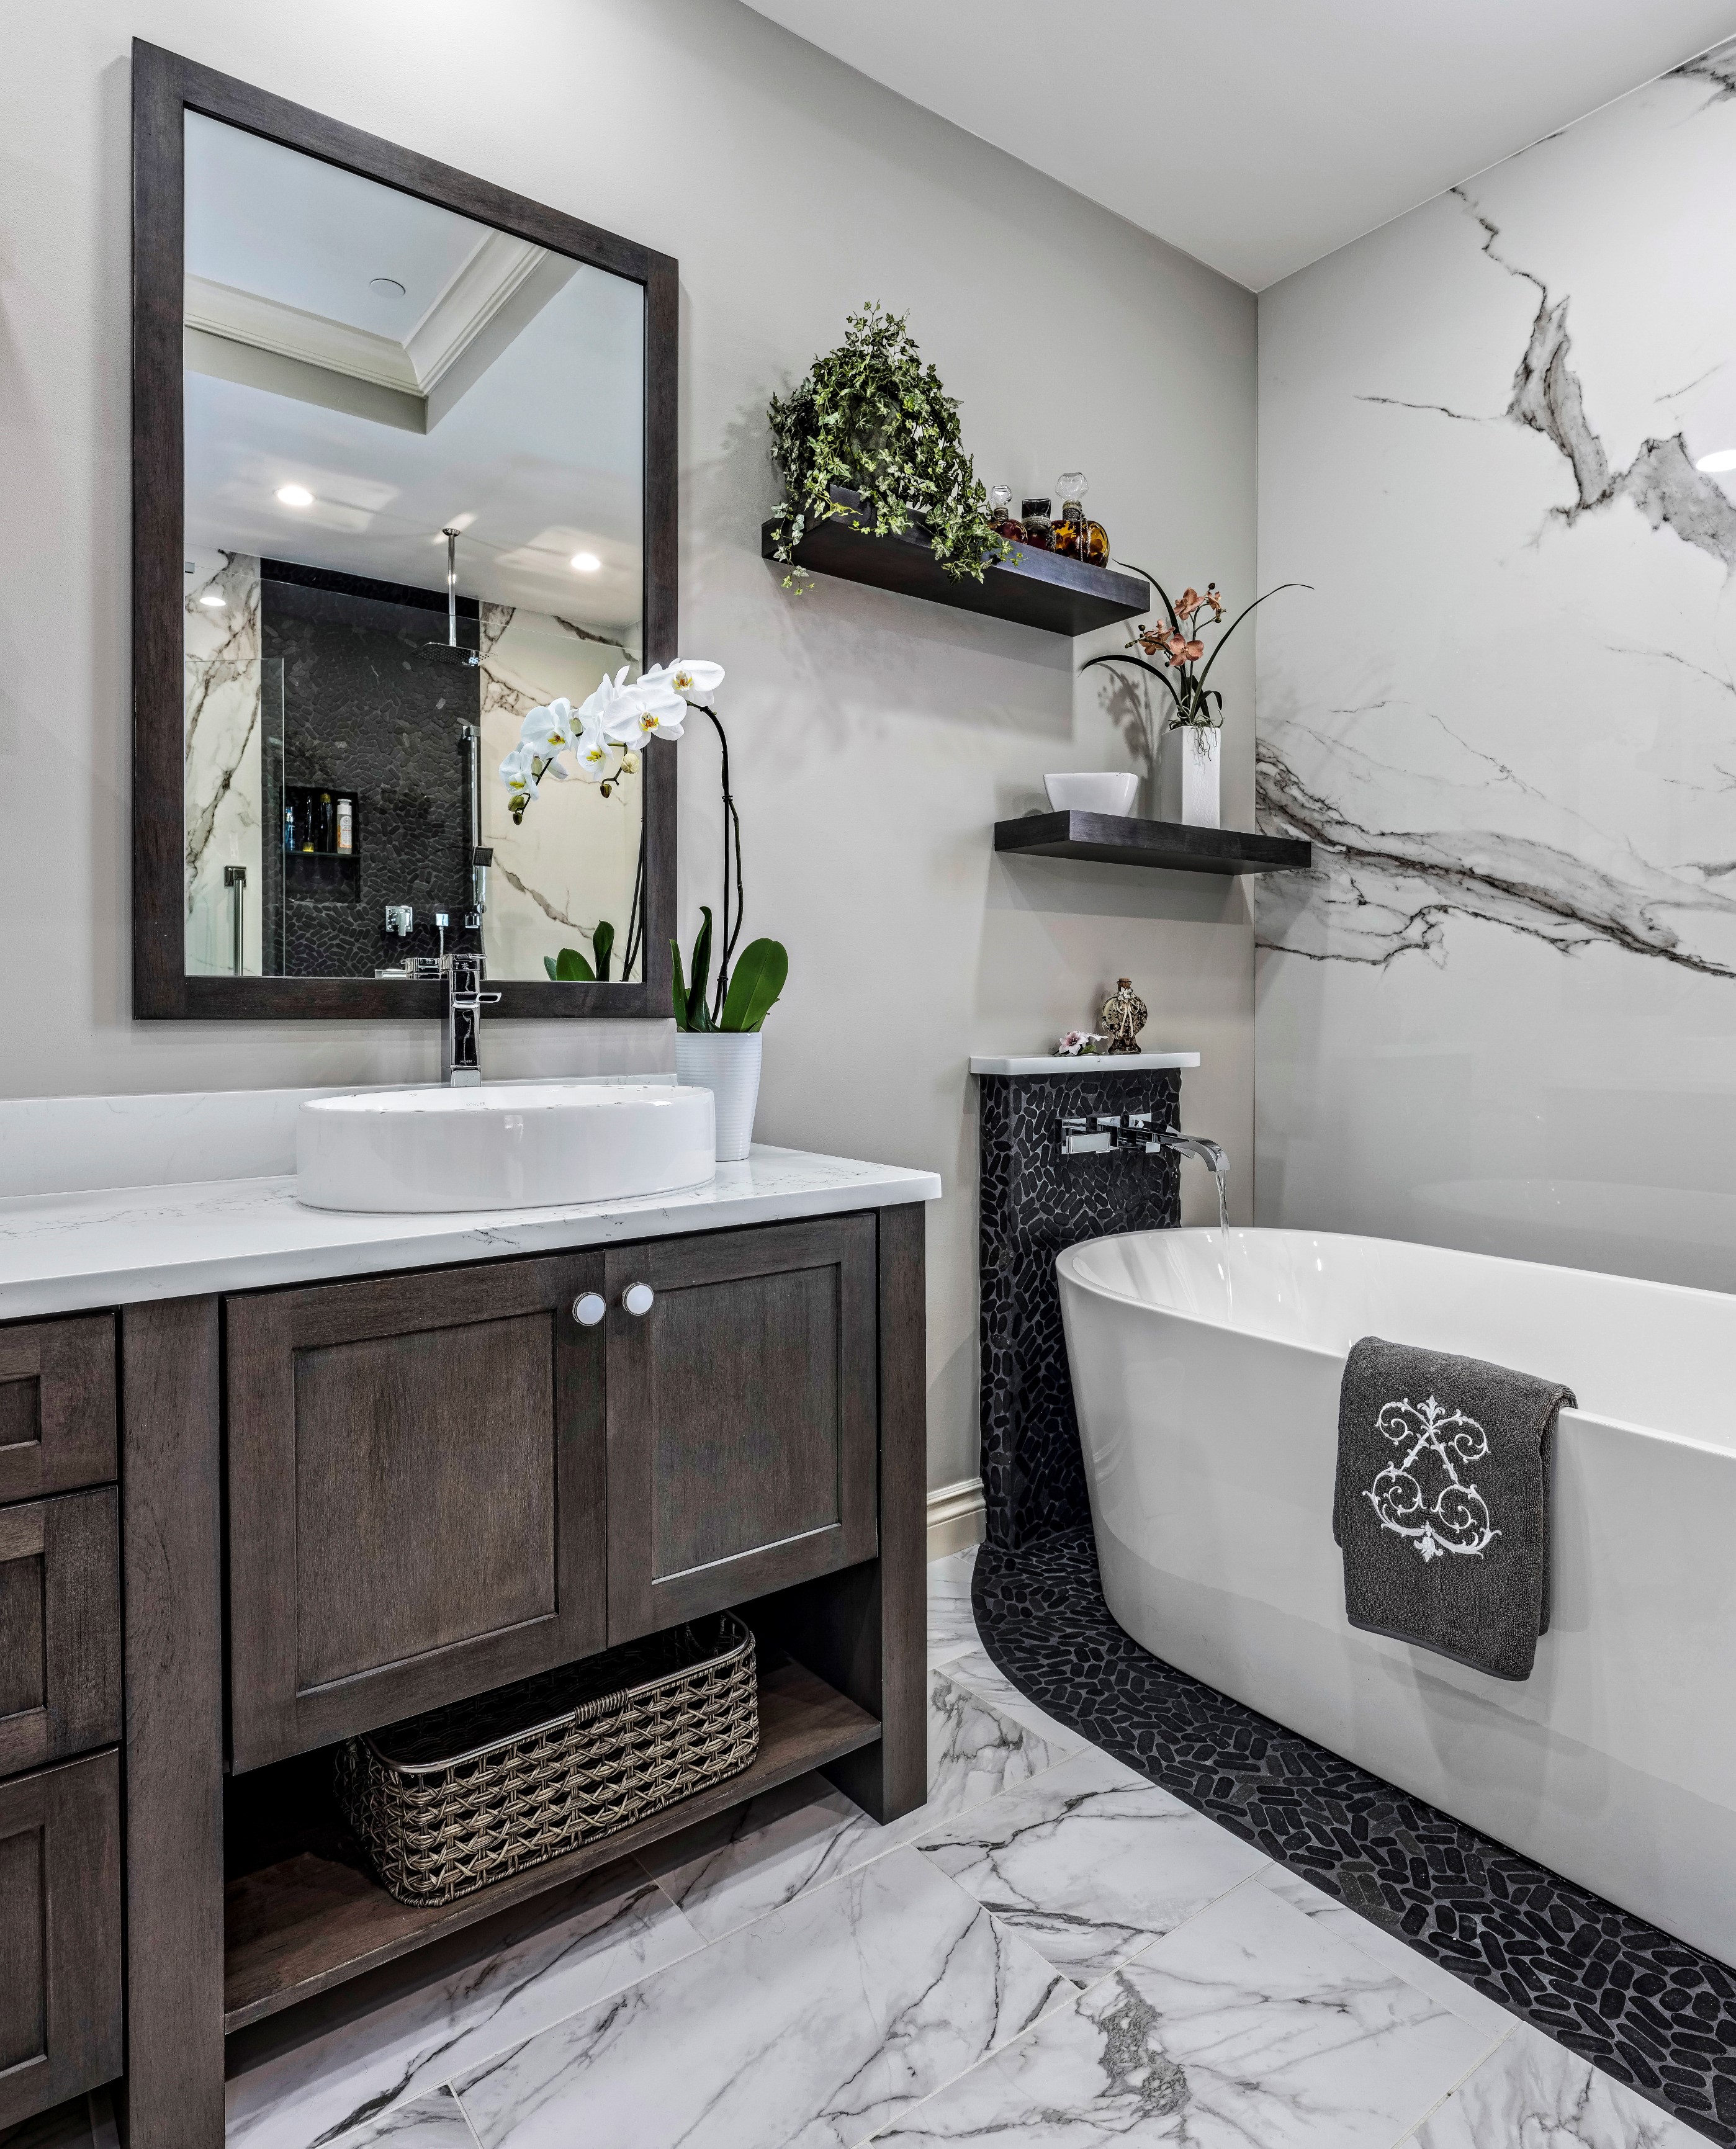 Bathroom Remodeling Typically Cost, How Much Does It Cost For A Full Bathroom Renovation